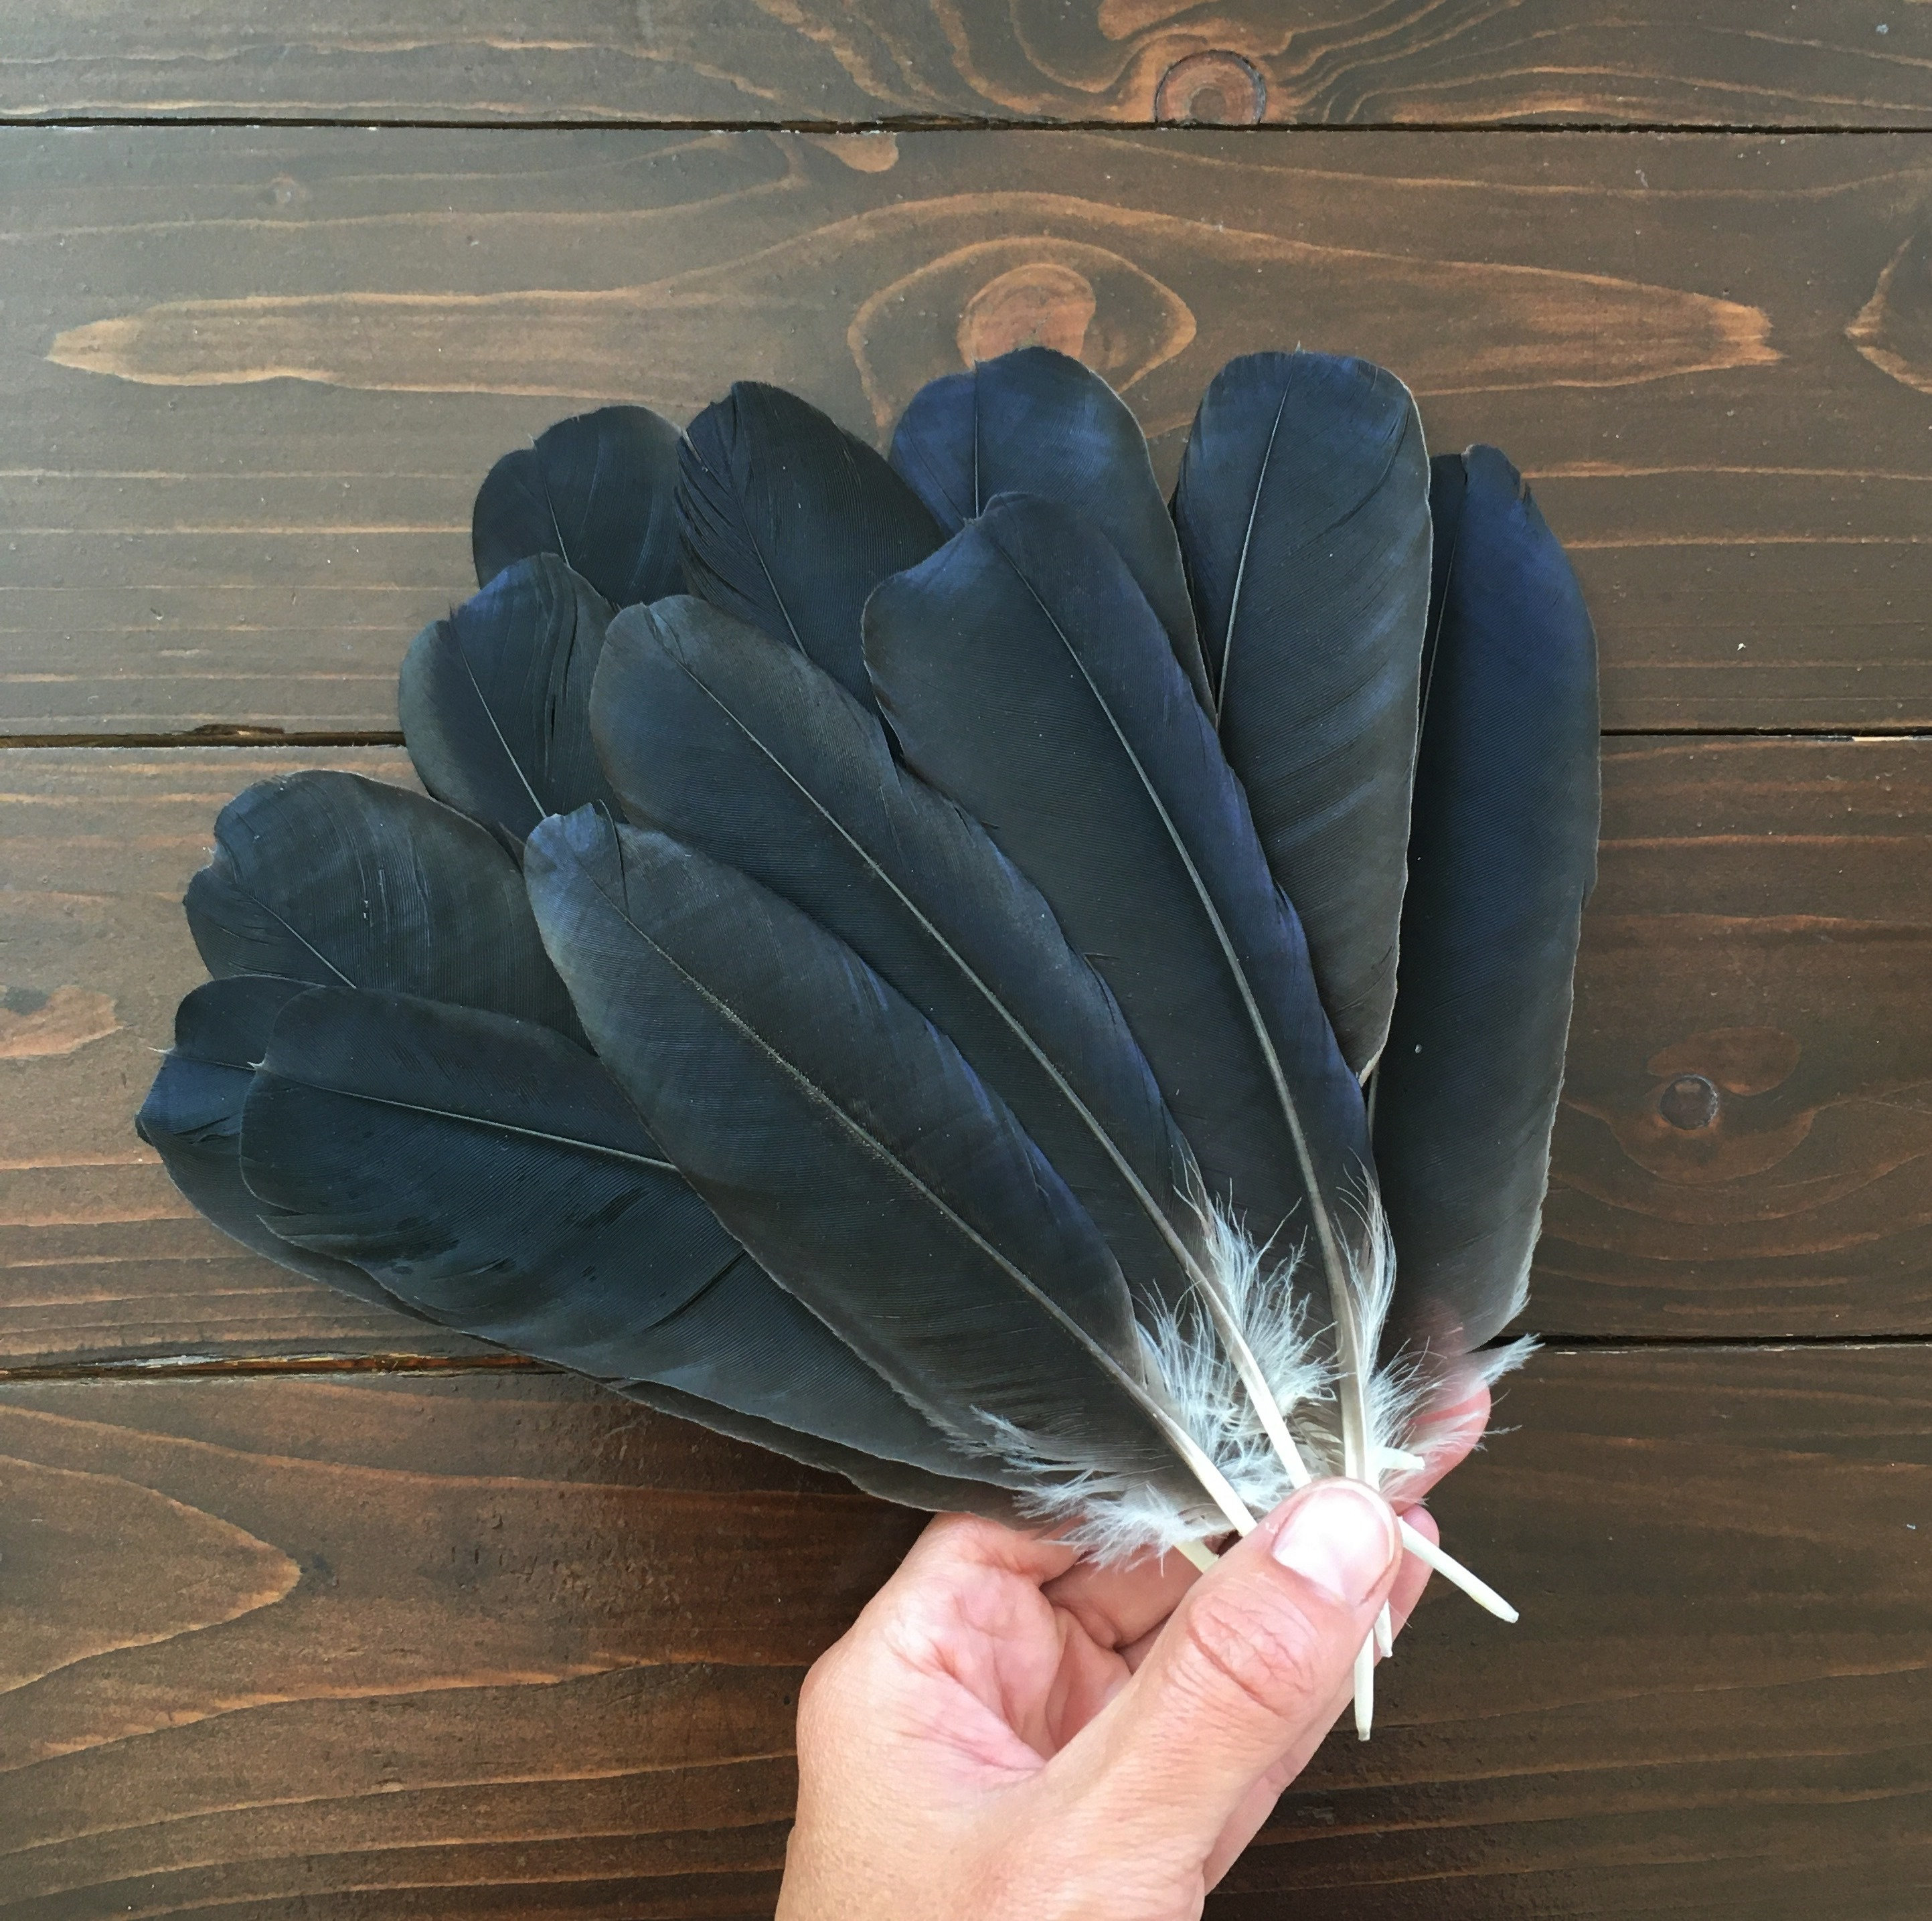 Large Black Feathers, FREE SHIPPING Available, 6 7 Inches, Black Feathers  for Crafts, Room Dreamcatcher Decor, Headpiece, Cosplay, Smudge 